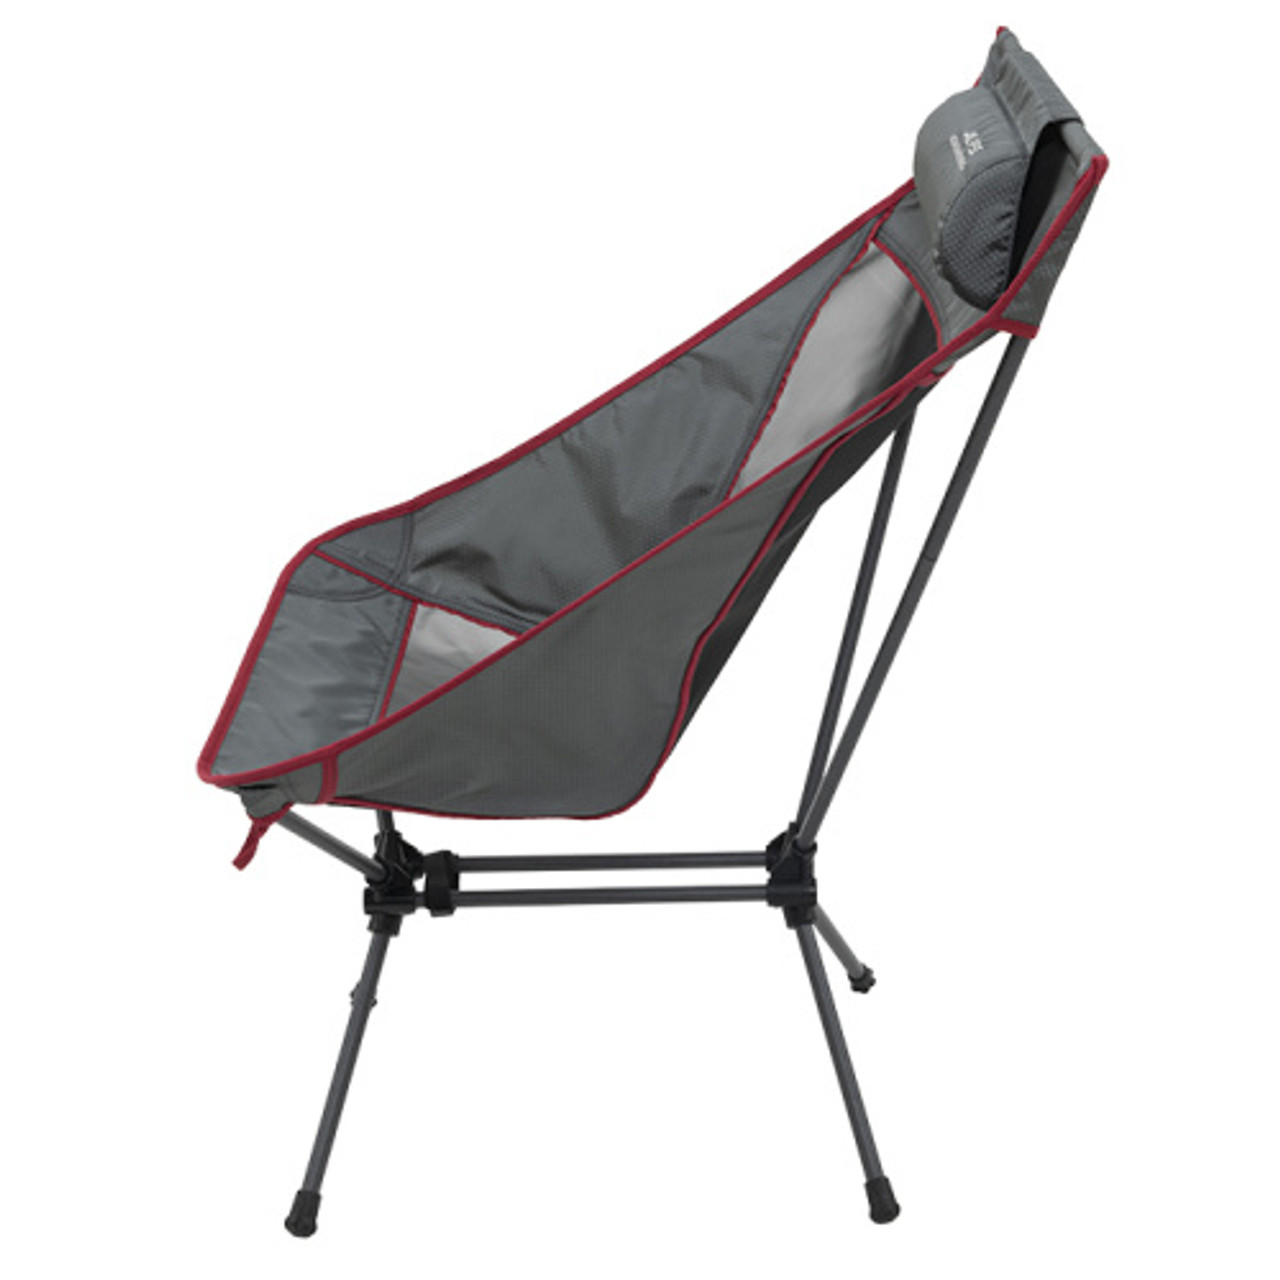 Alps Simmer Lounger Camping Chair